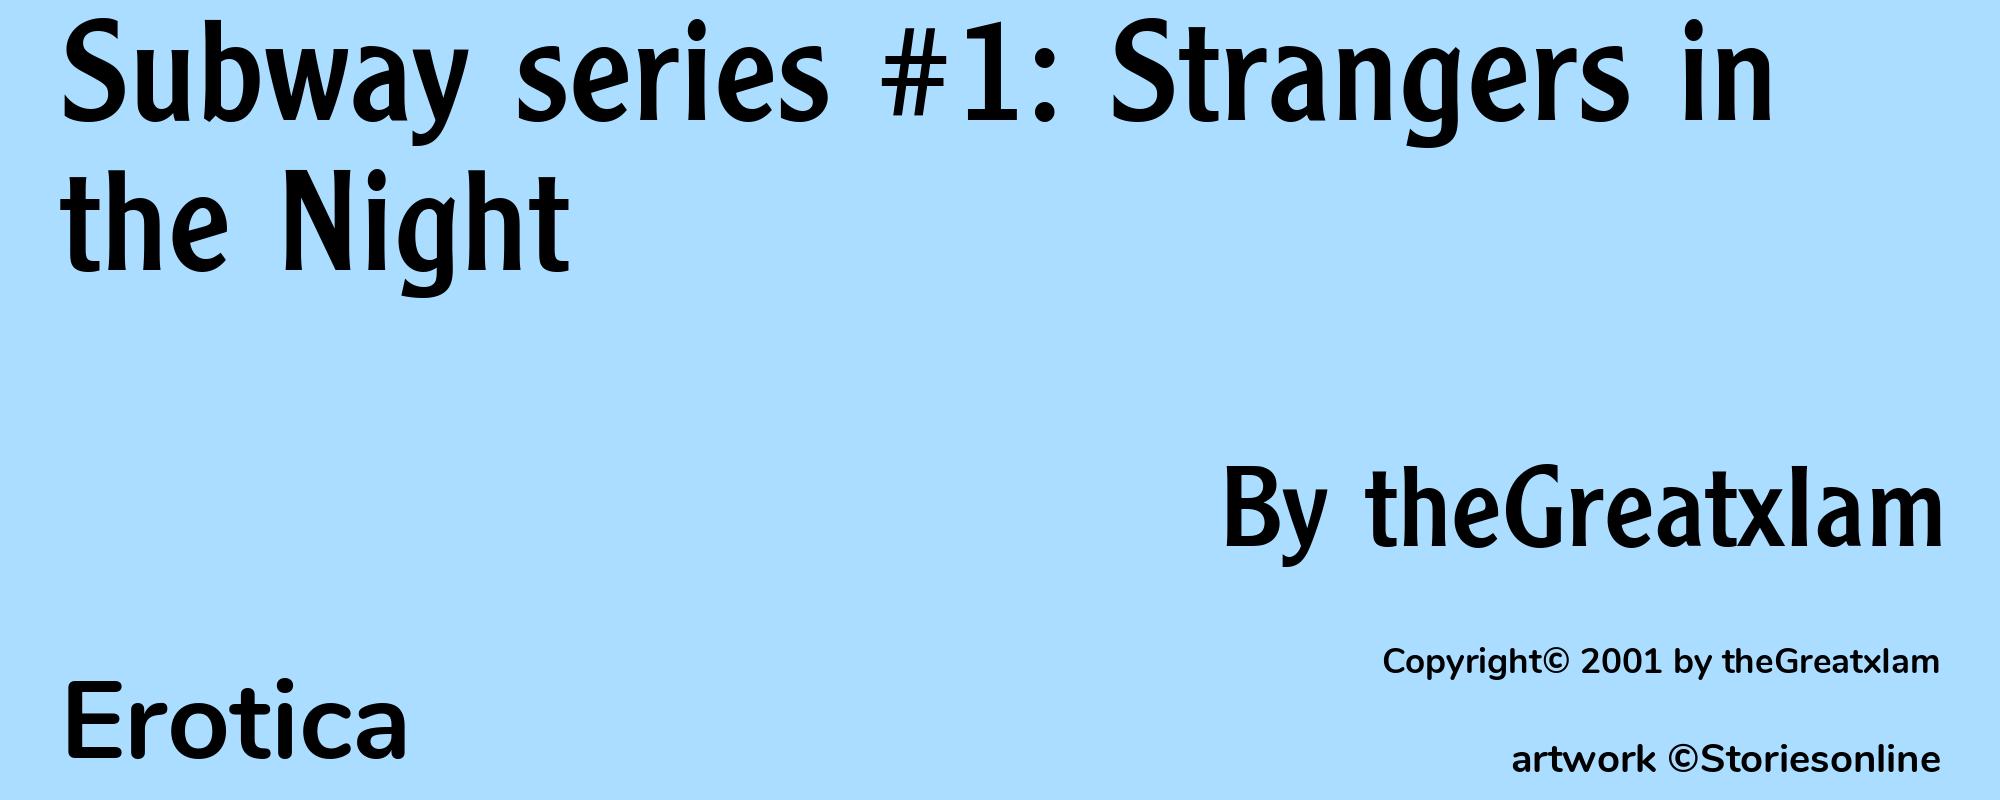 Subway series #1: Strangers in the Night - Cover